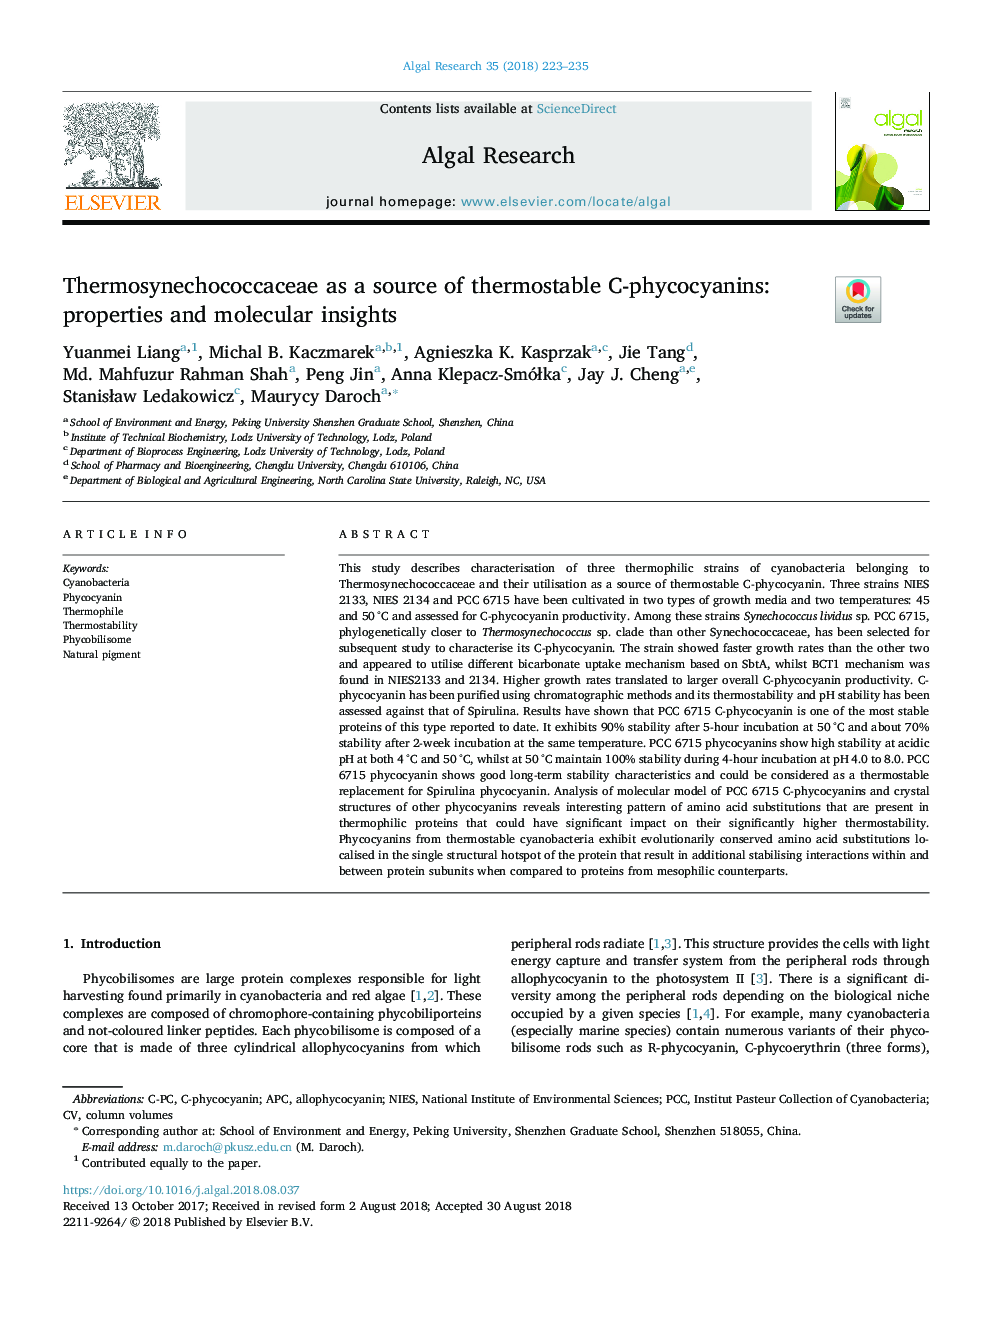 Thermosynechococcaceae as a source of thermostable C-phycocyanins: properties and molecular insights